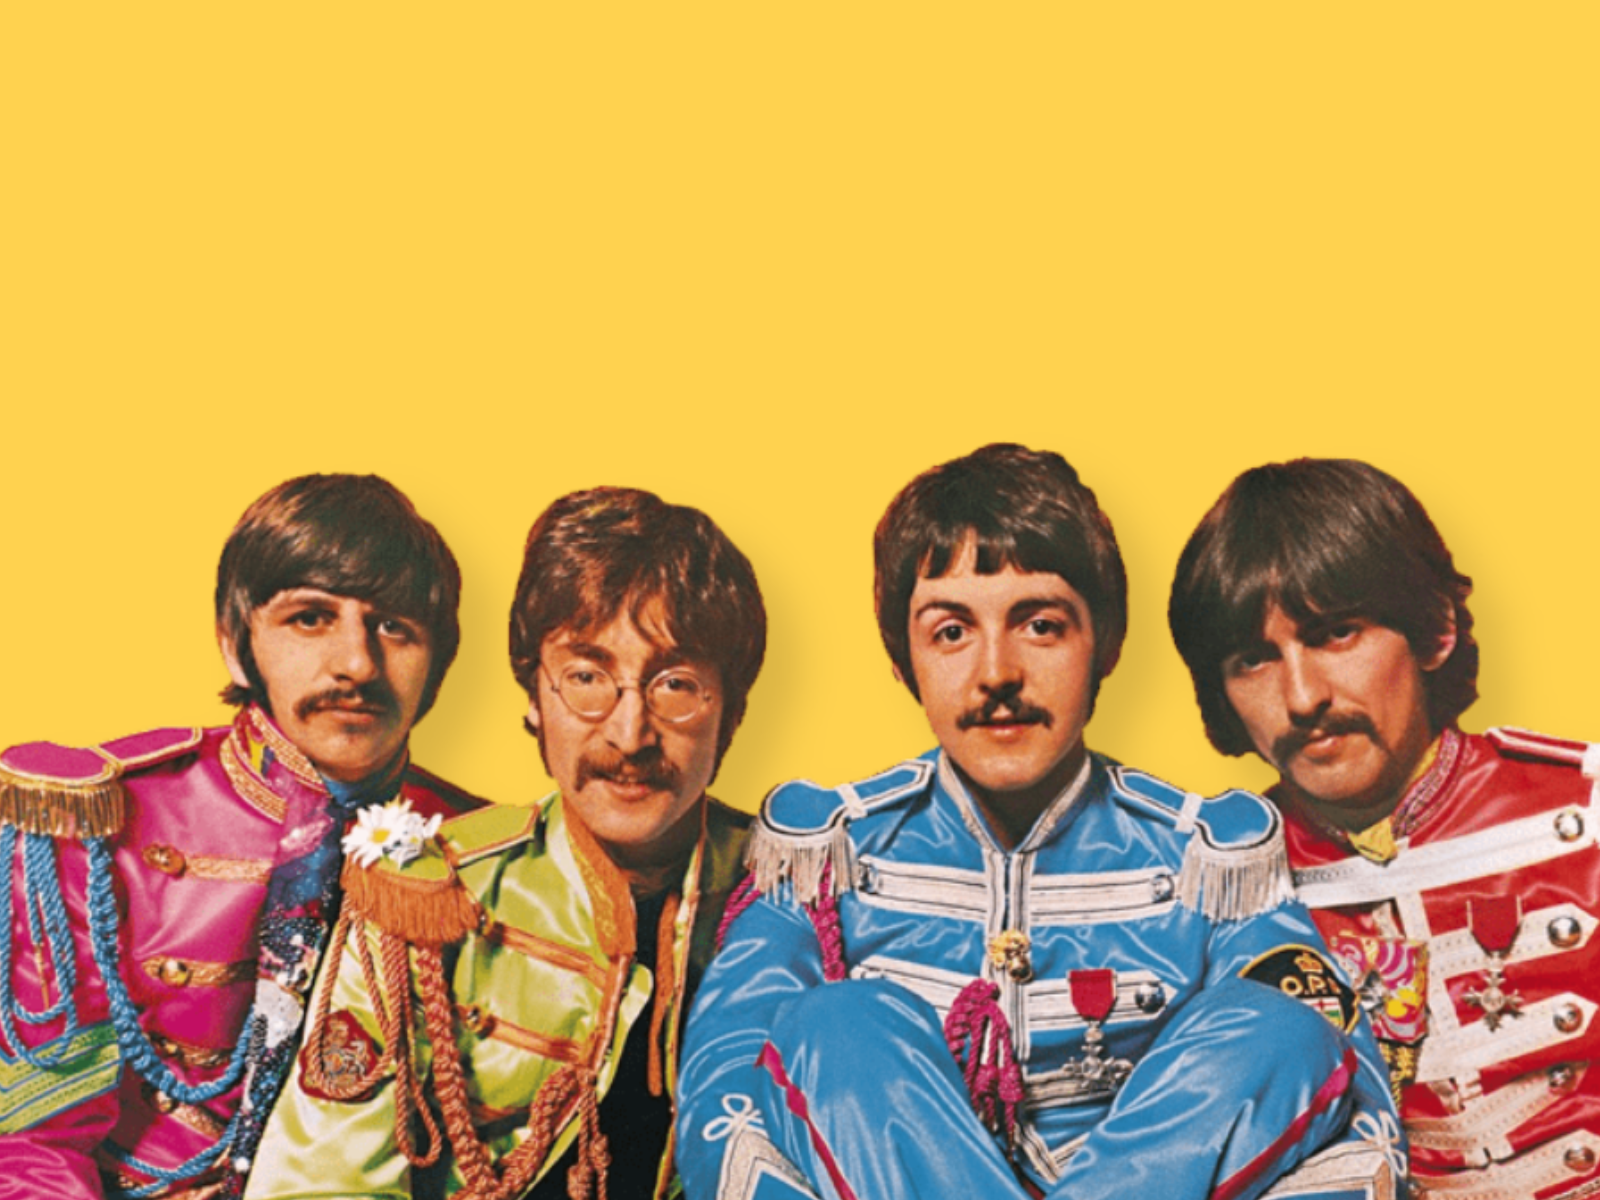 Get The Beatles with National ARVC Music License